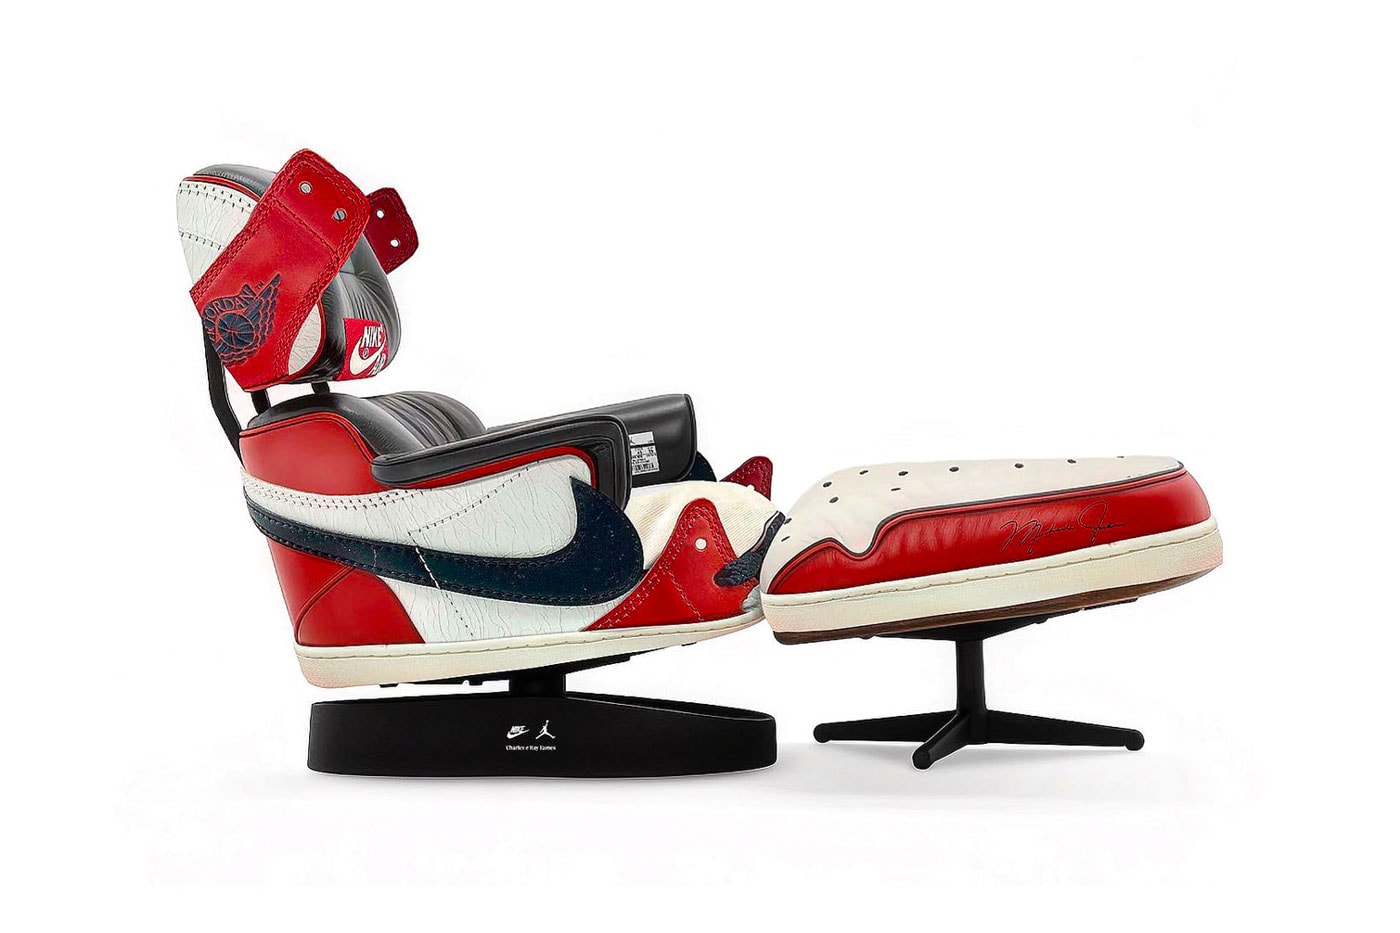 MarkVonRama Reimagines Iconic Chairs With Sneaker Elements